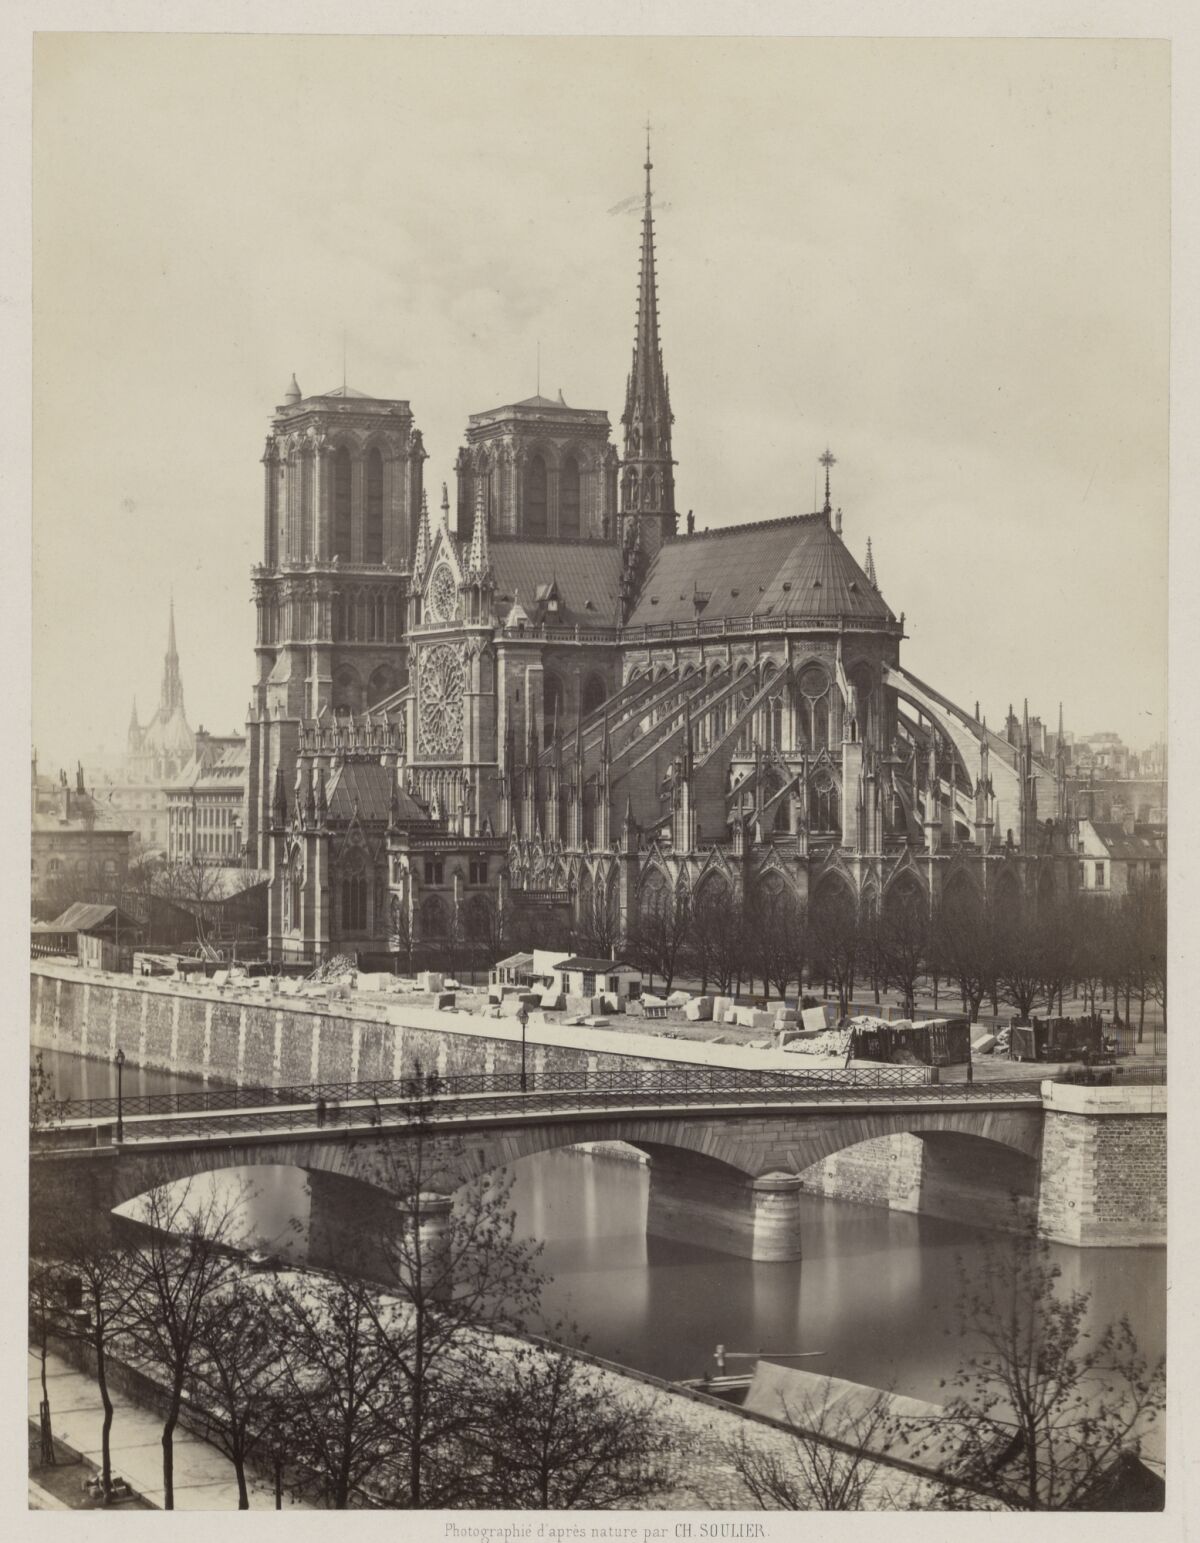 "An Enduring Icon: Notre-Dame Cathedral"